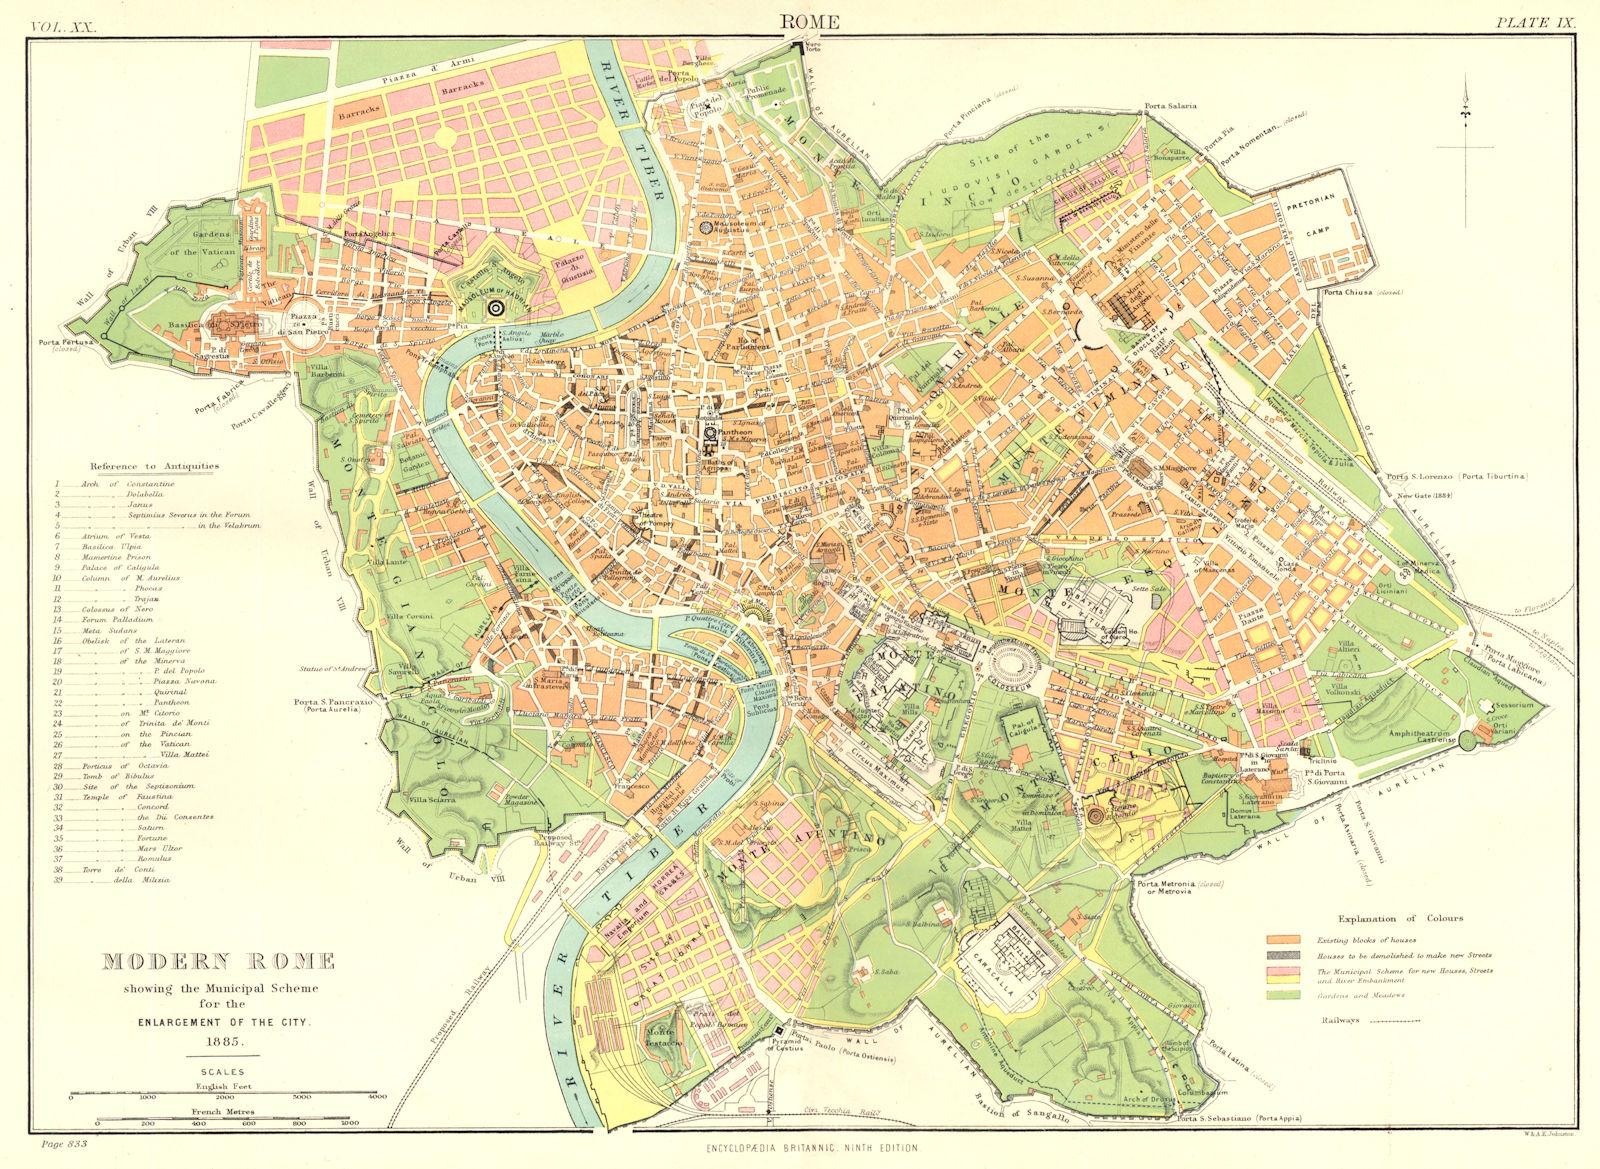 Associate Product MODERN ROME. Scheme for enlargement of city 1885.Britannica 9th edition 1898 map